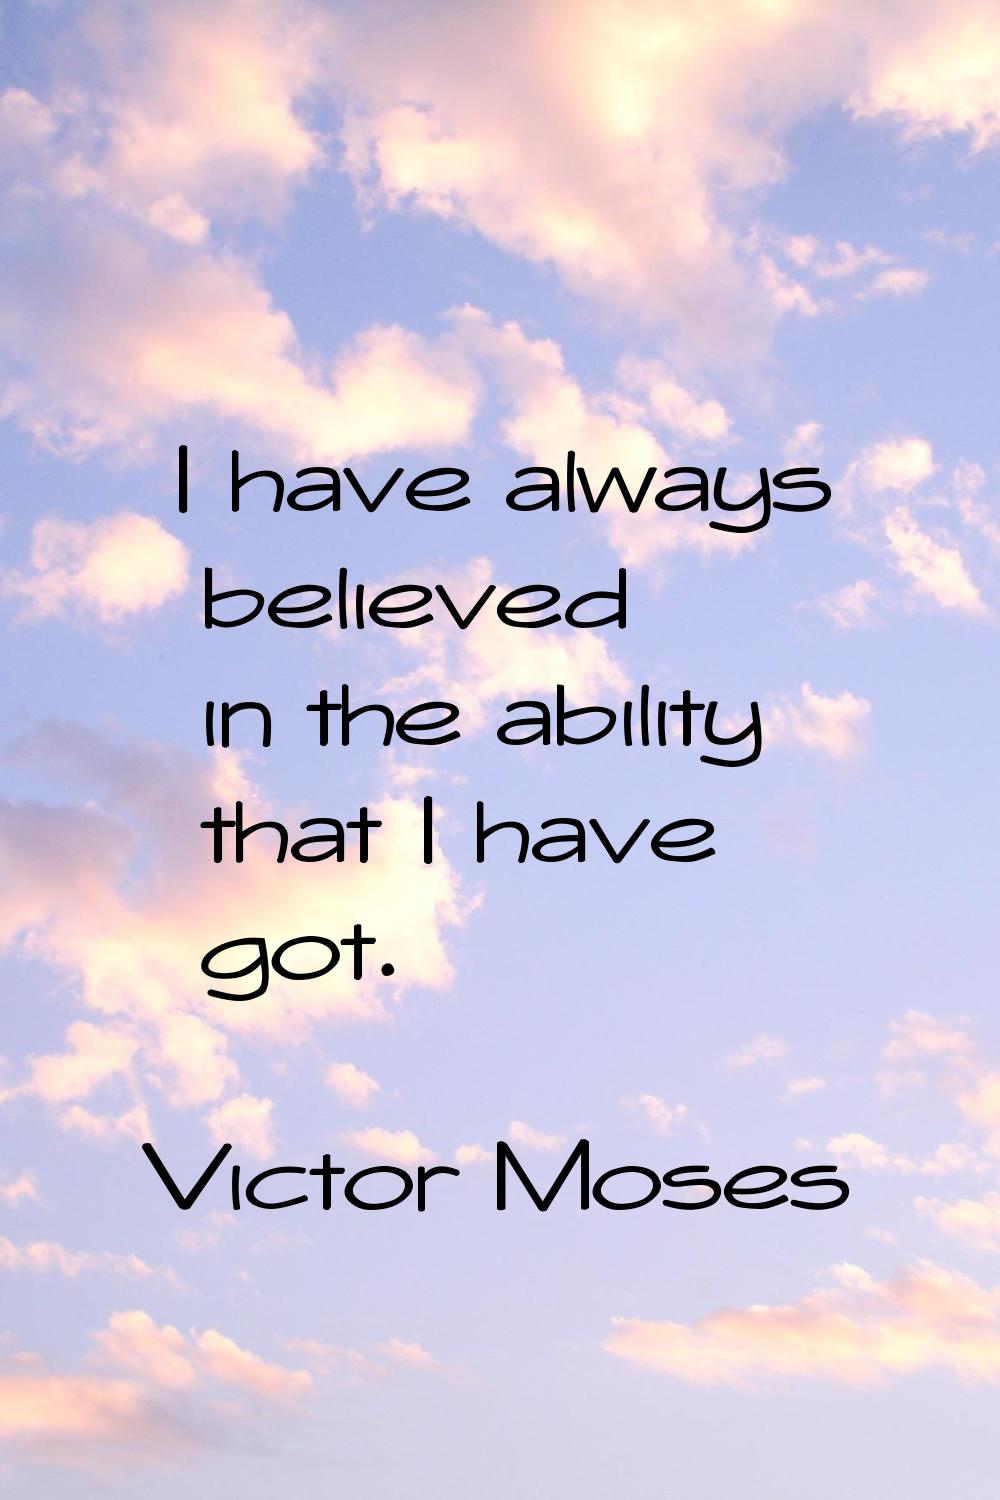 I have always believed in the ability that I have got.